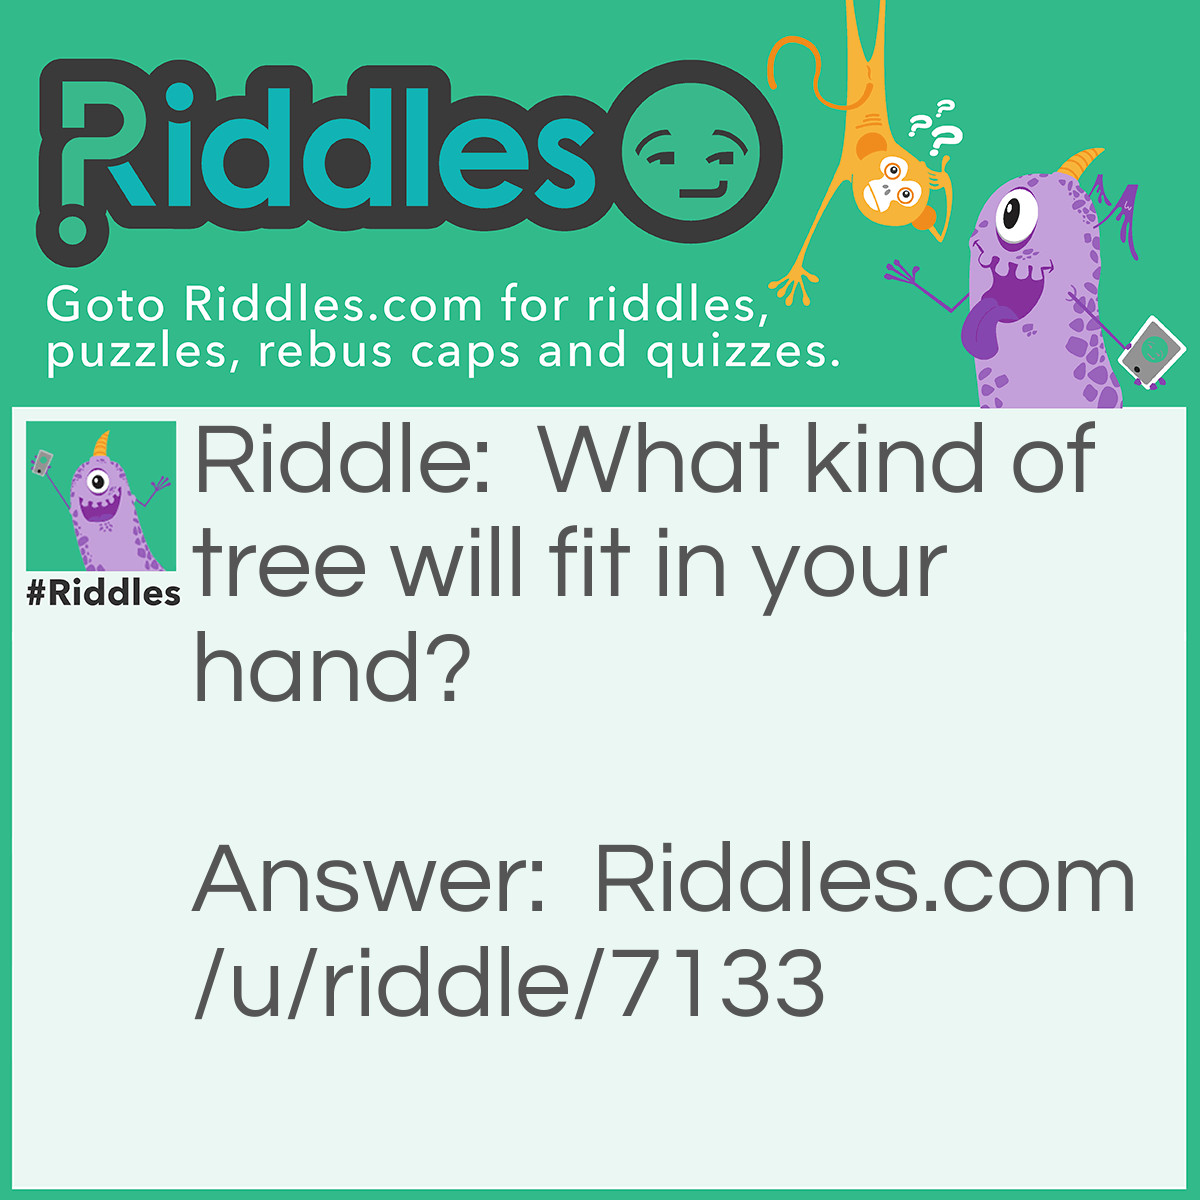 Riddle: What kind of tree will fit in your hand? Answer: A palm.